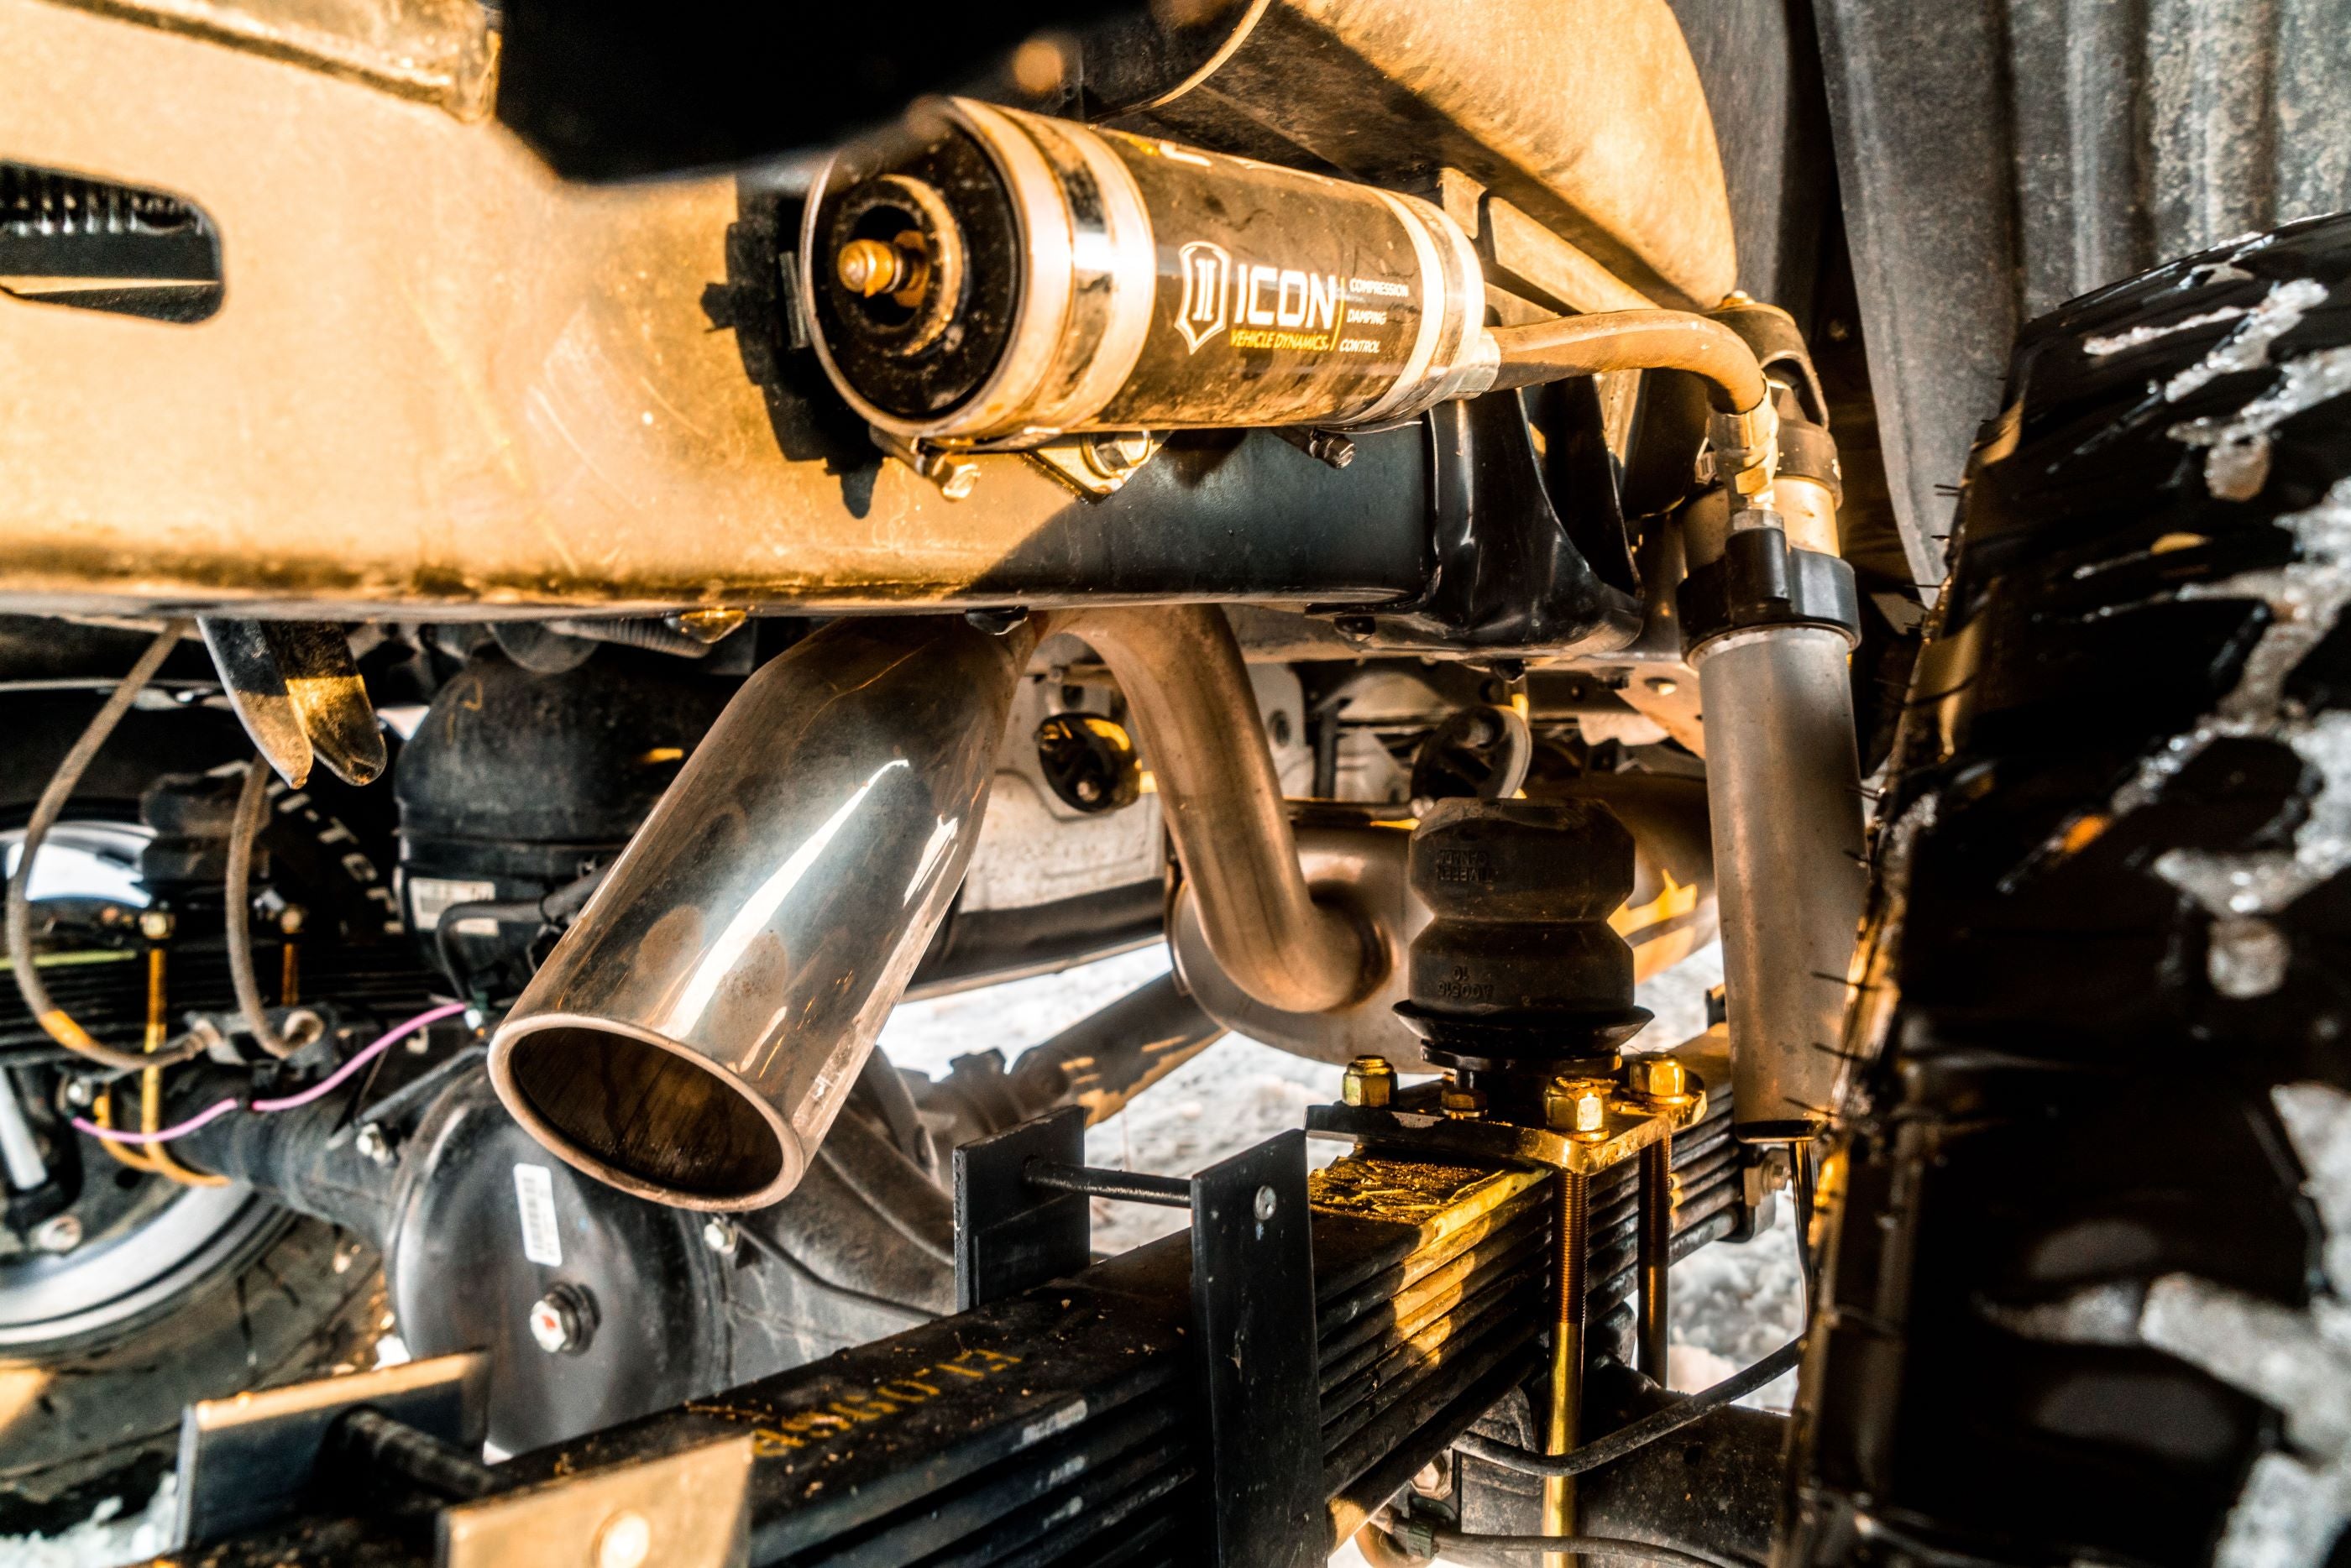 How Does The Exhaust System Affect Engine Performance?